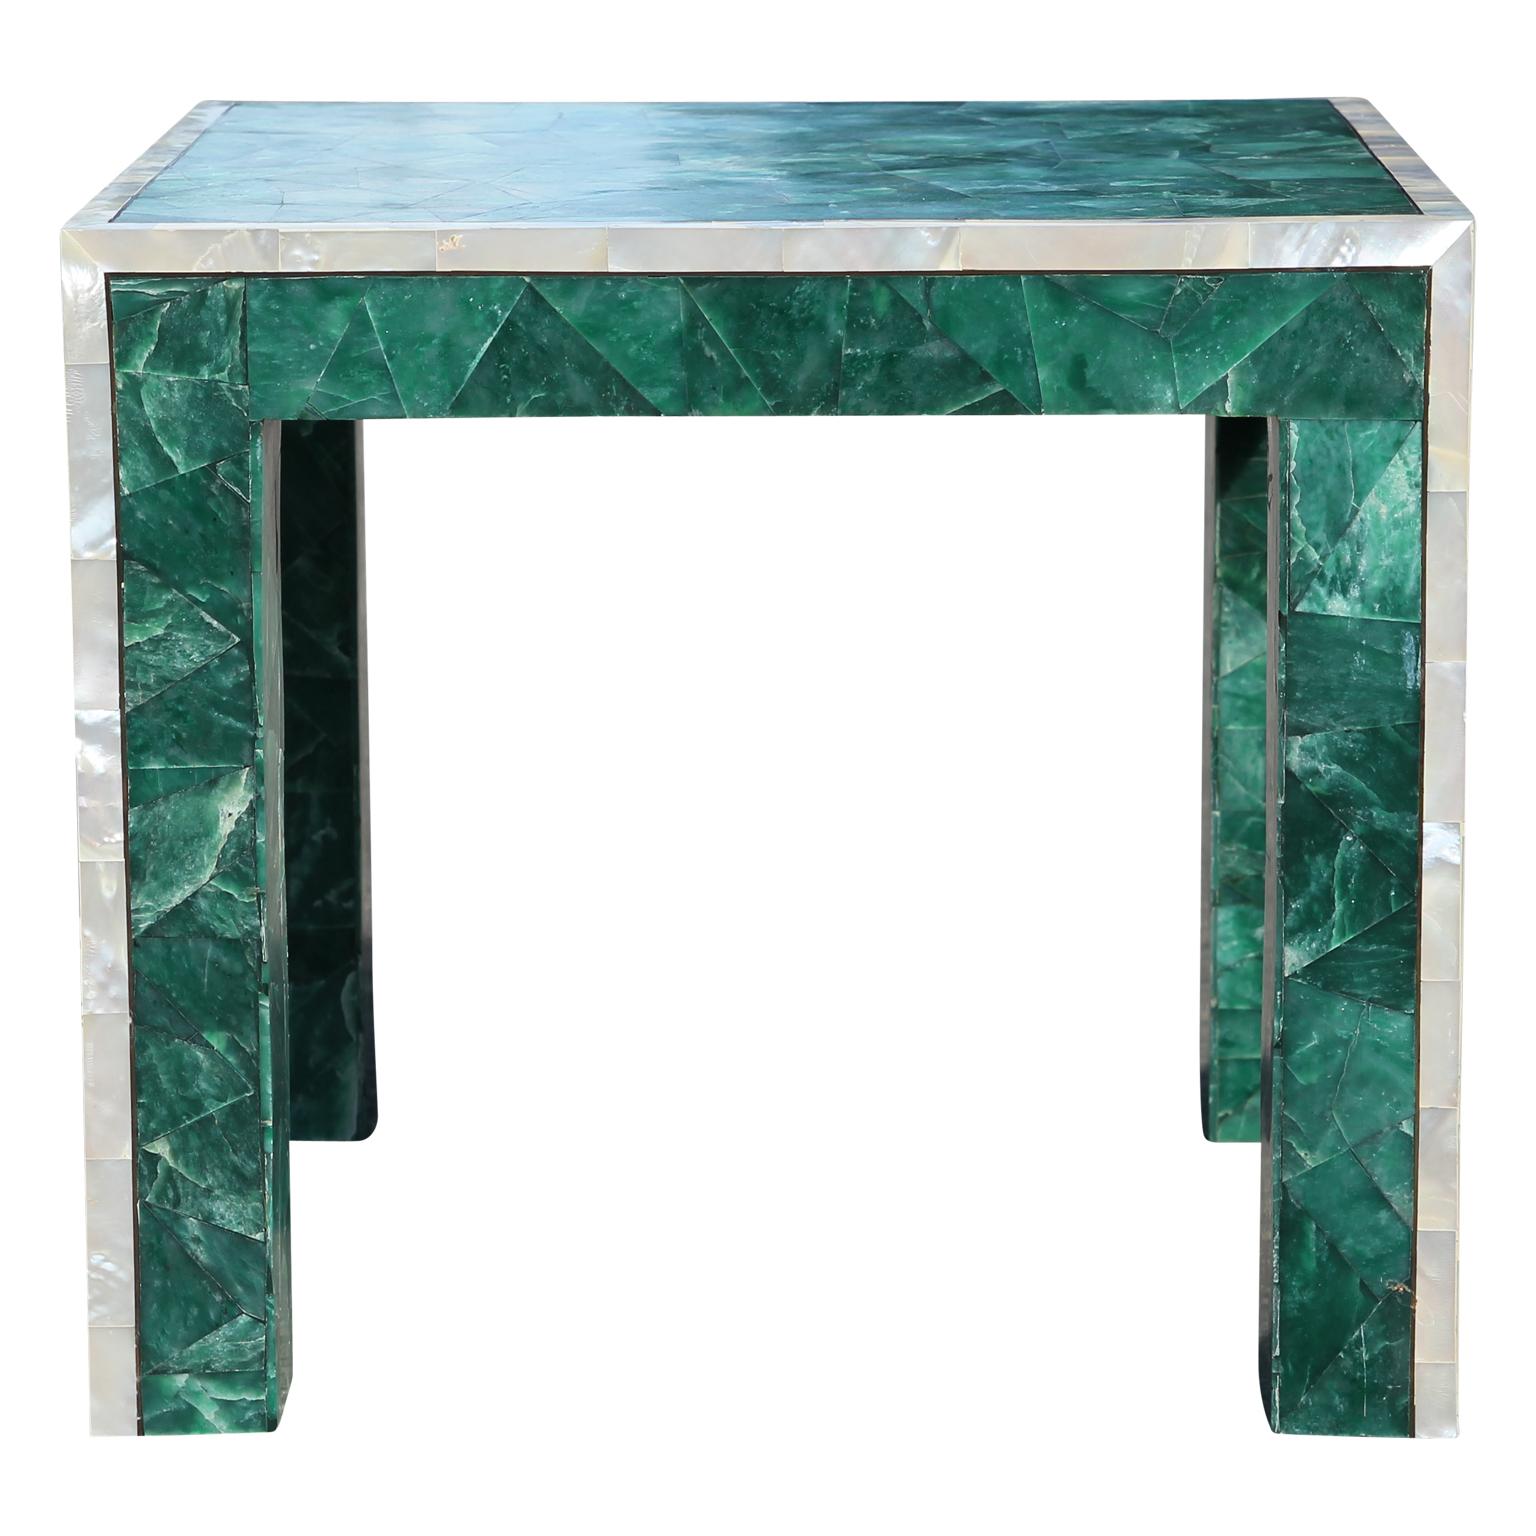 Stunning pair of modern square nephrite tessellated tables with pearl trim. Possibly Maitland Smith and made the Philippines. Excellent quality. The color of the stone looks like malachite.